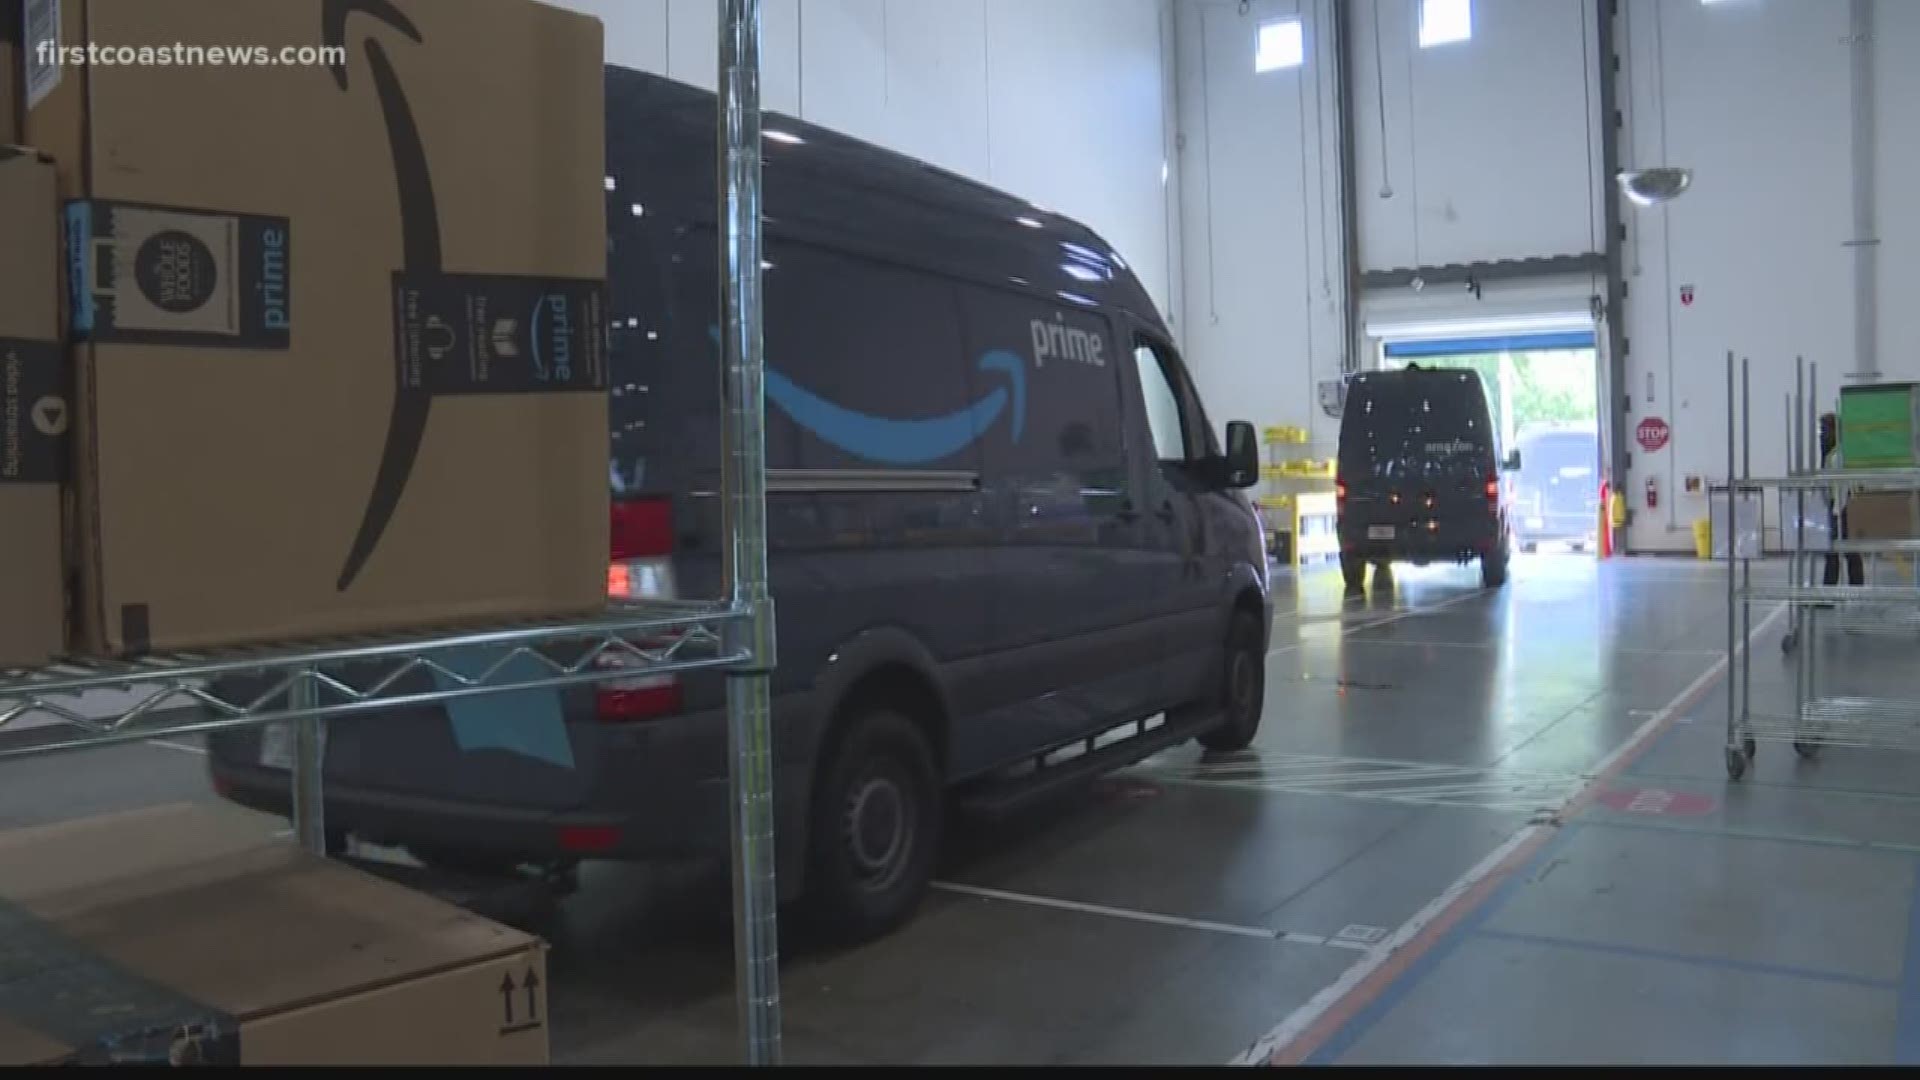 To connect your garage door with Amazon, customers need to install the Key in the Amazon app and select "in-garage delivery."